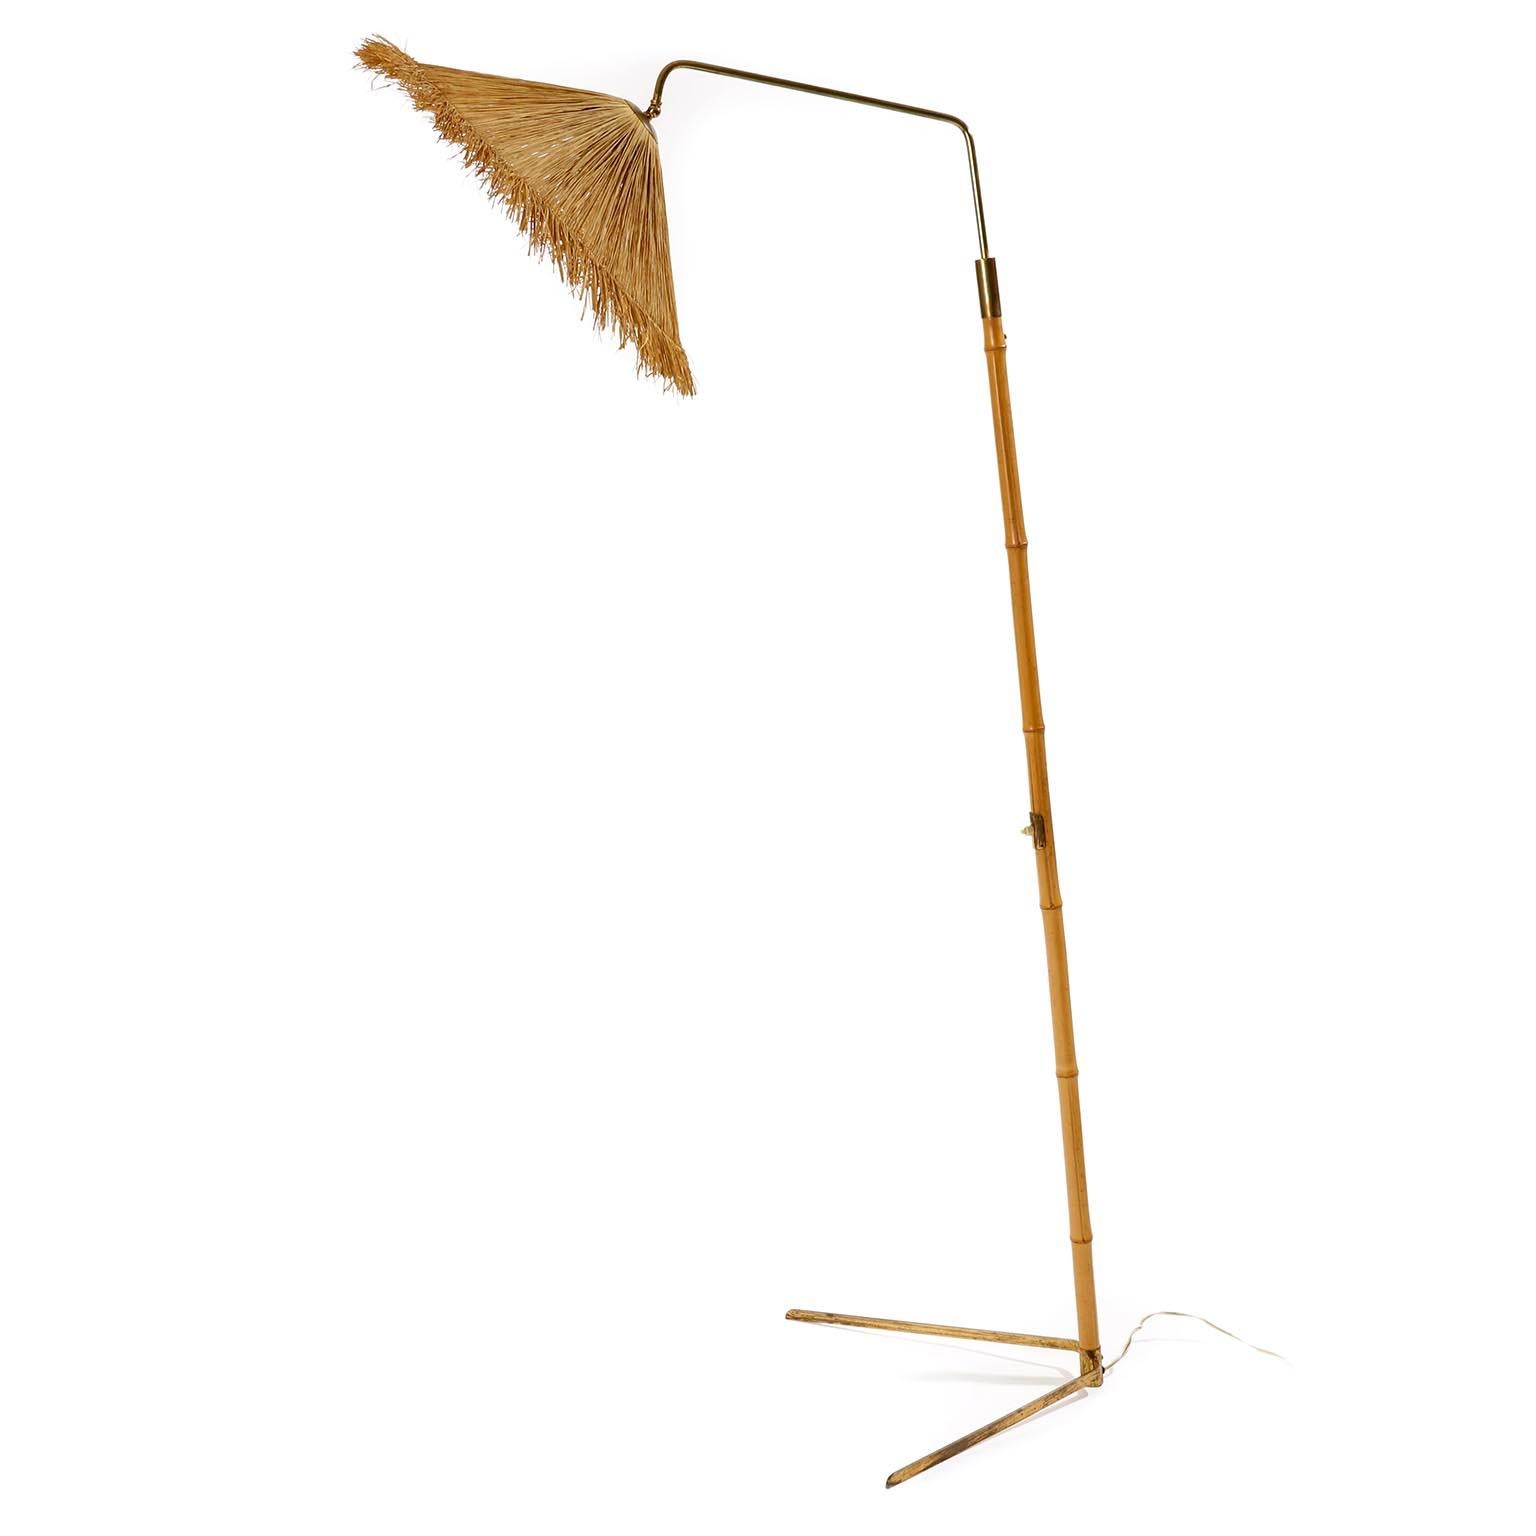 A floor lamp manufactured in Austria in midcentury, circa 1960 (late 1950s or early 1960s).
It is made of a nice mixture of materials and colors: a bamboo rod, naturally aged and patinated brass, and a lamp shade made of straw.
The lamp shade is